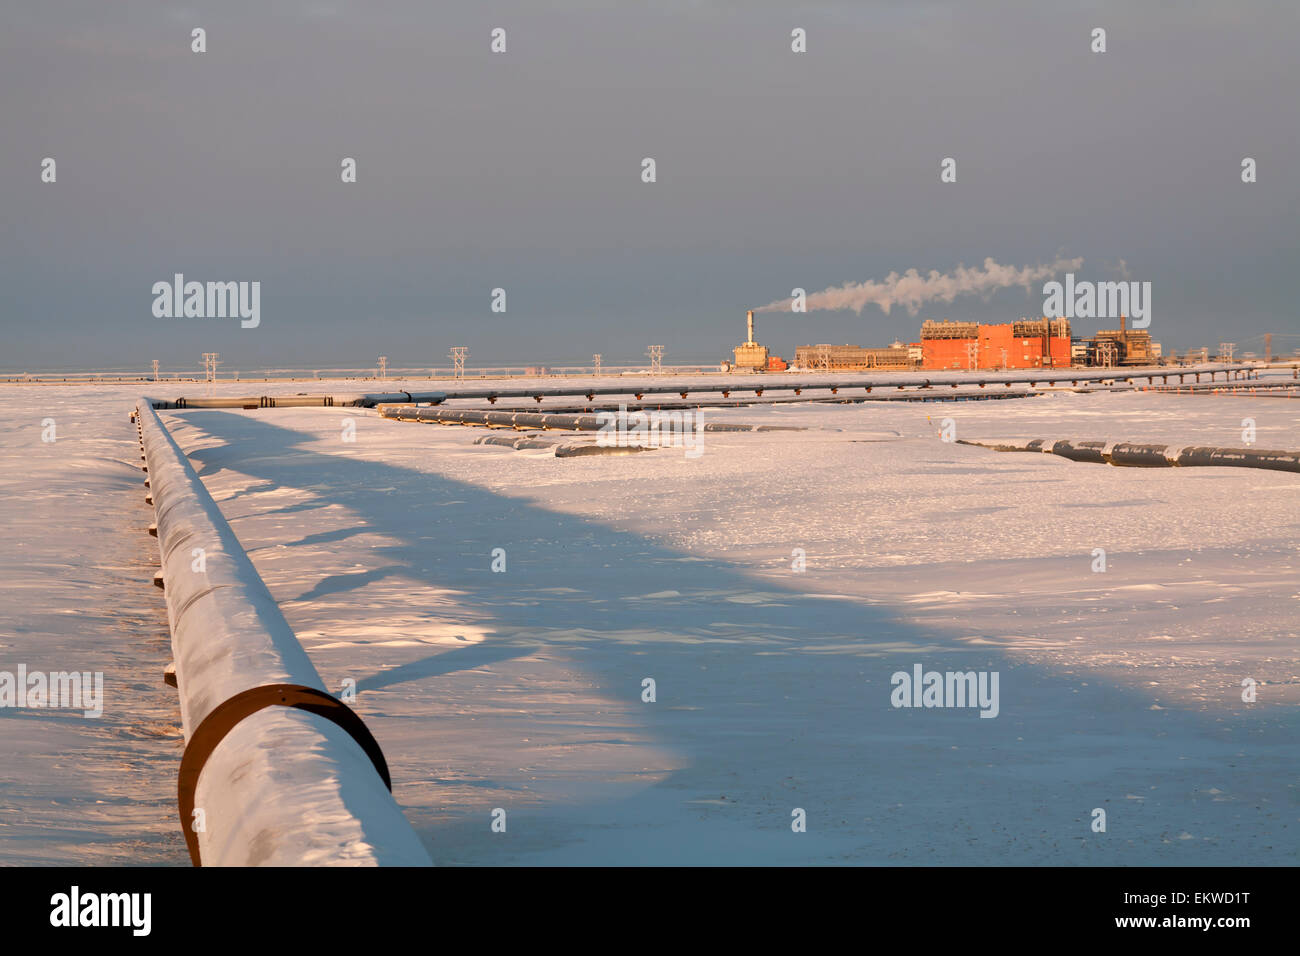 Snow Covered Pipelines And The Central Gas Facility (Cgf), Prudhoe Bay Oil Field, Arctic Alaska, Winter Stock Photo